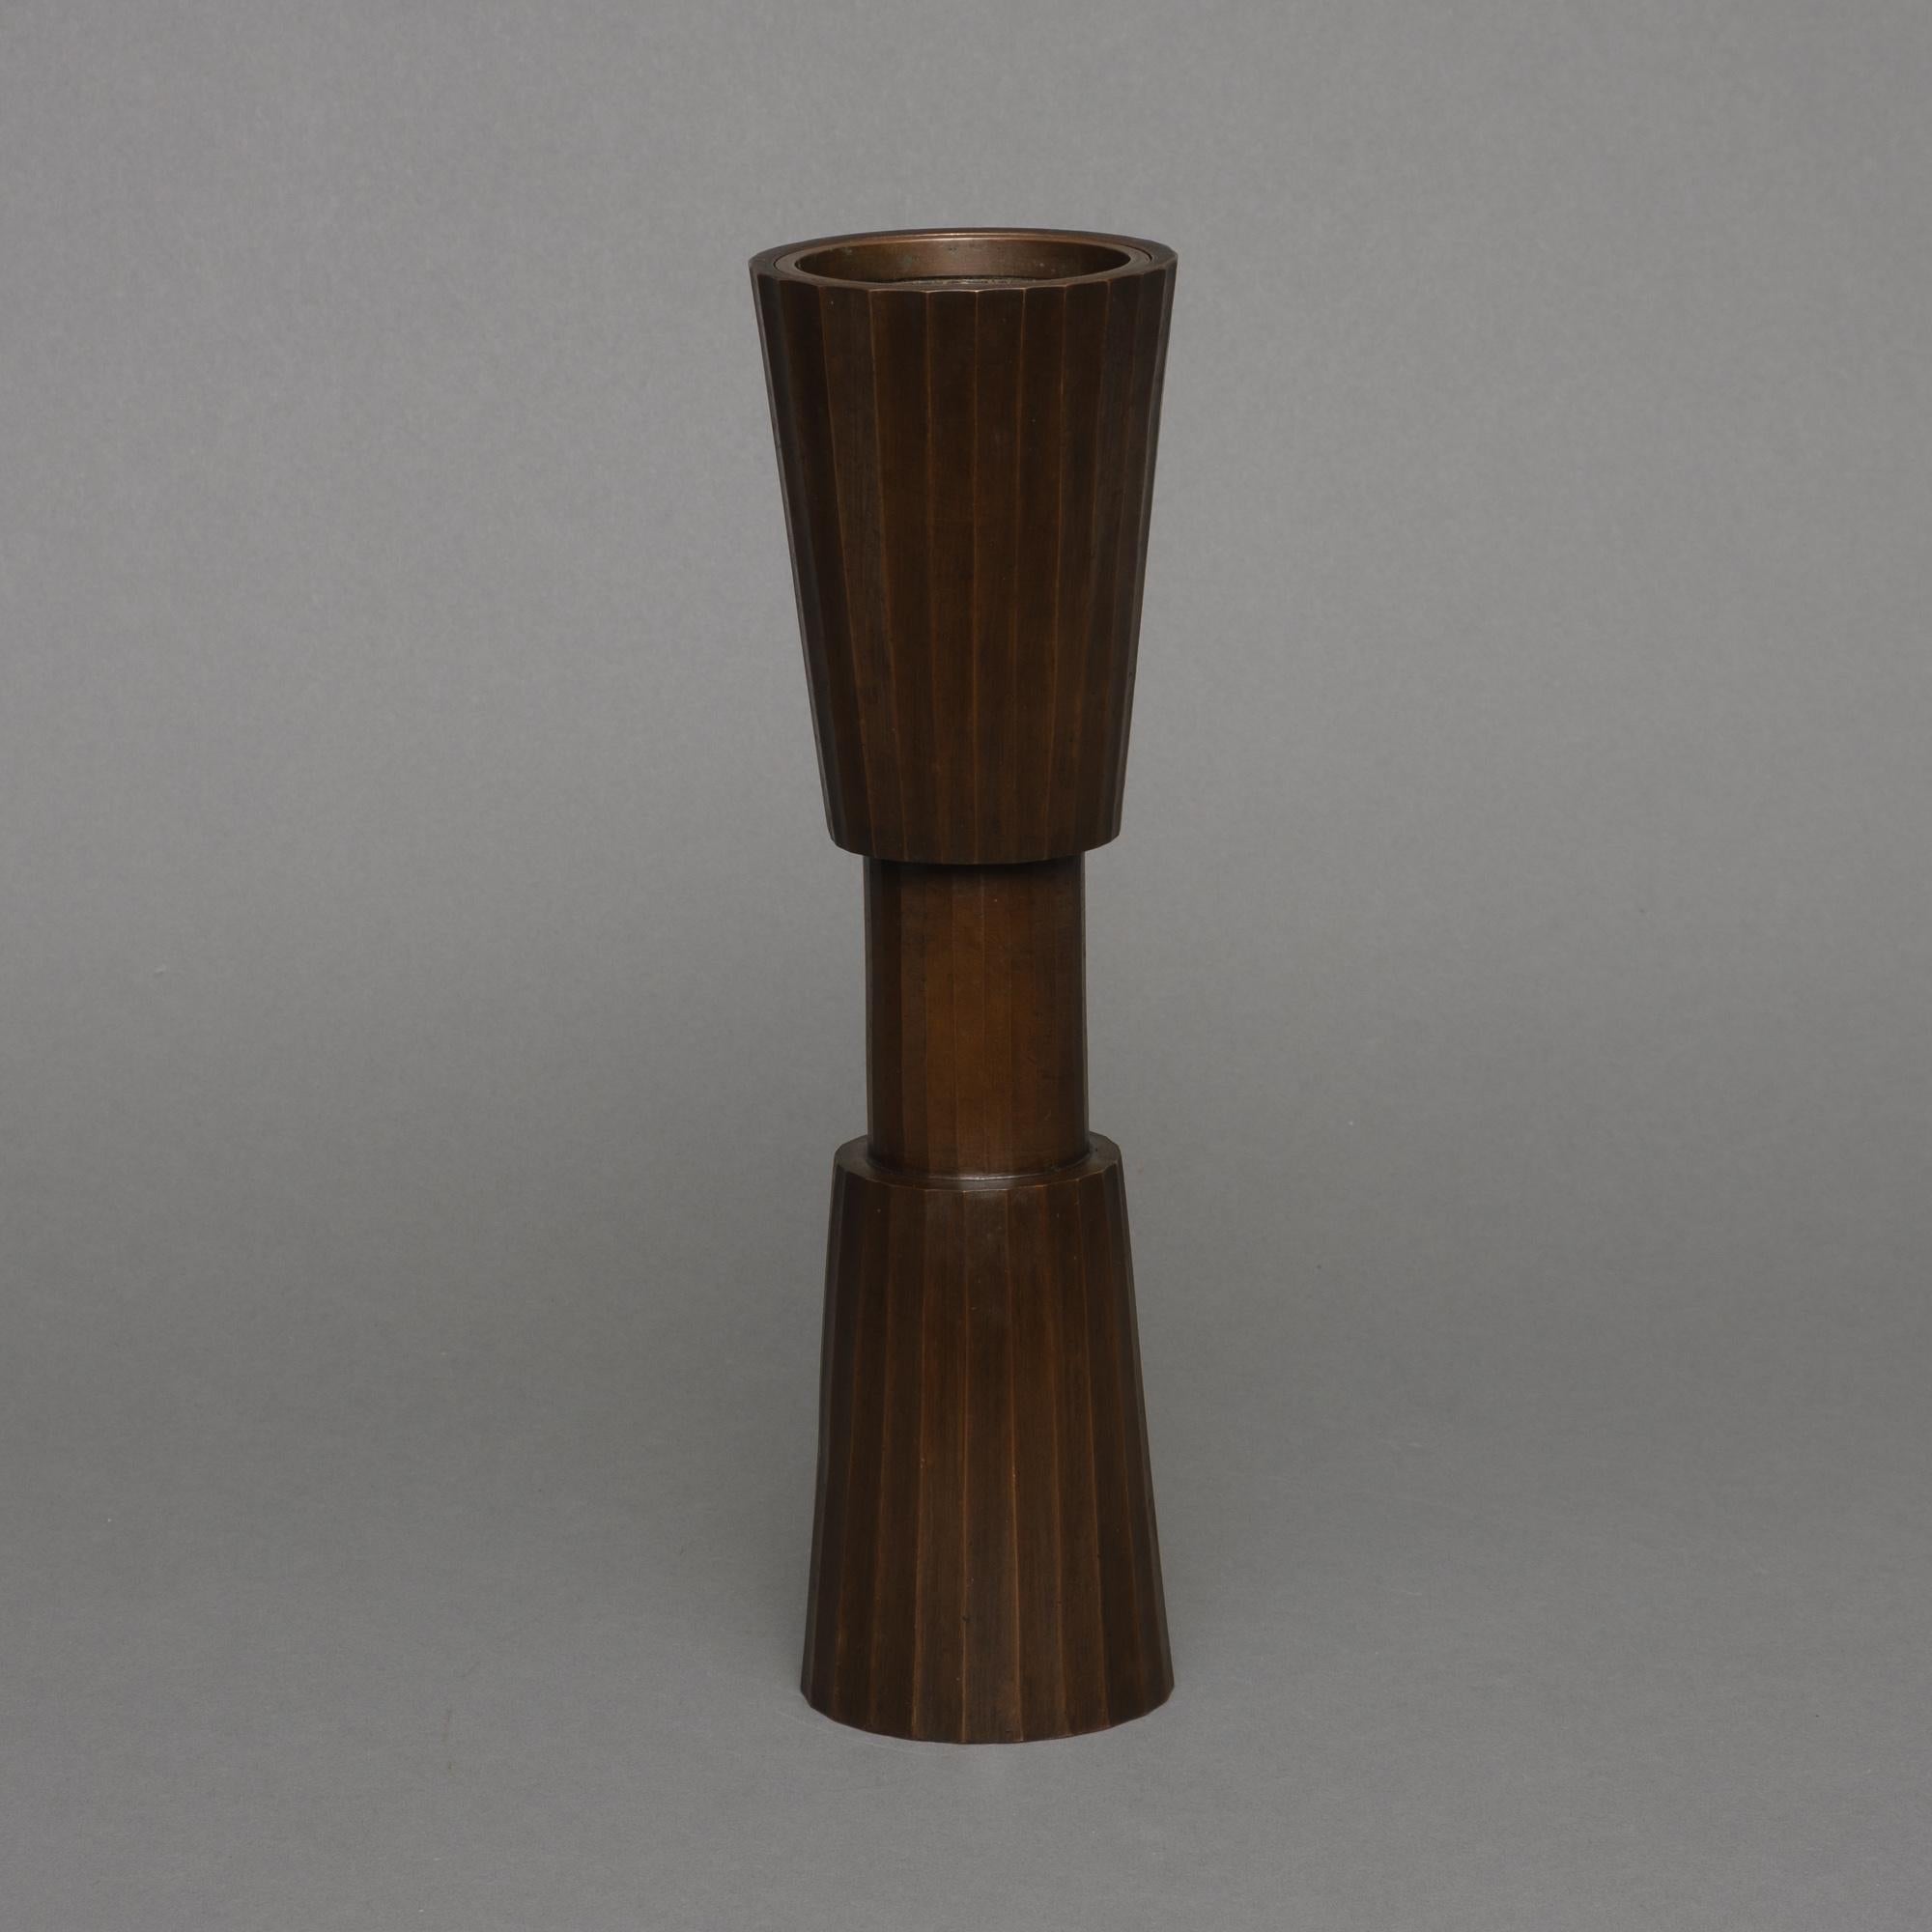 Japanese Patinated Bronze Vase in an Hourglass-Shape with Vertical Ribs 3